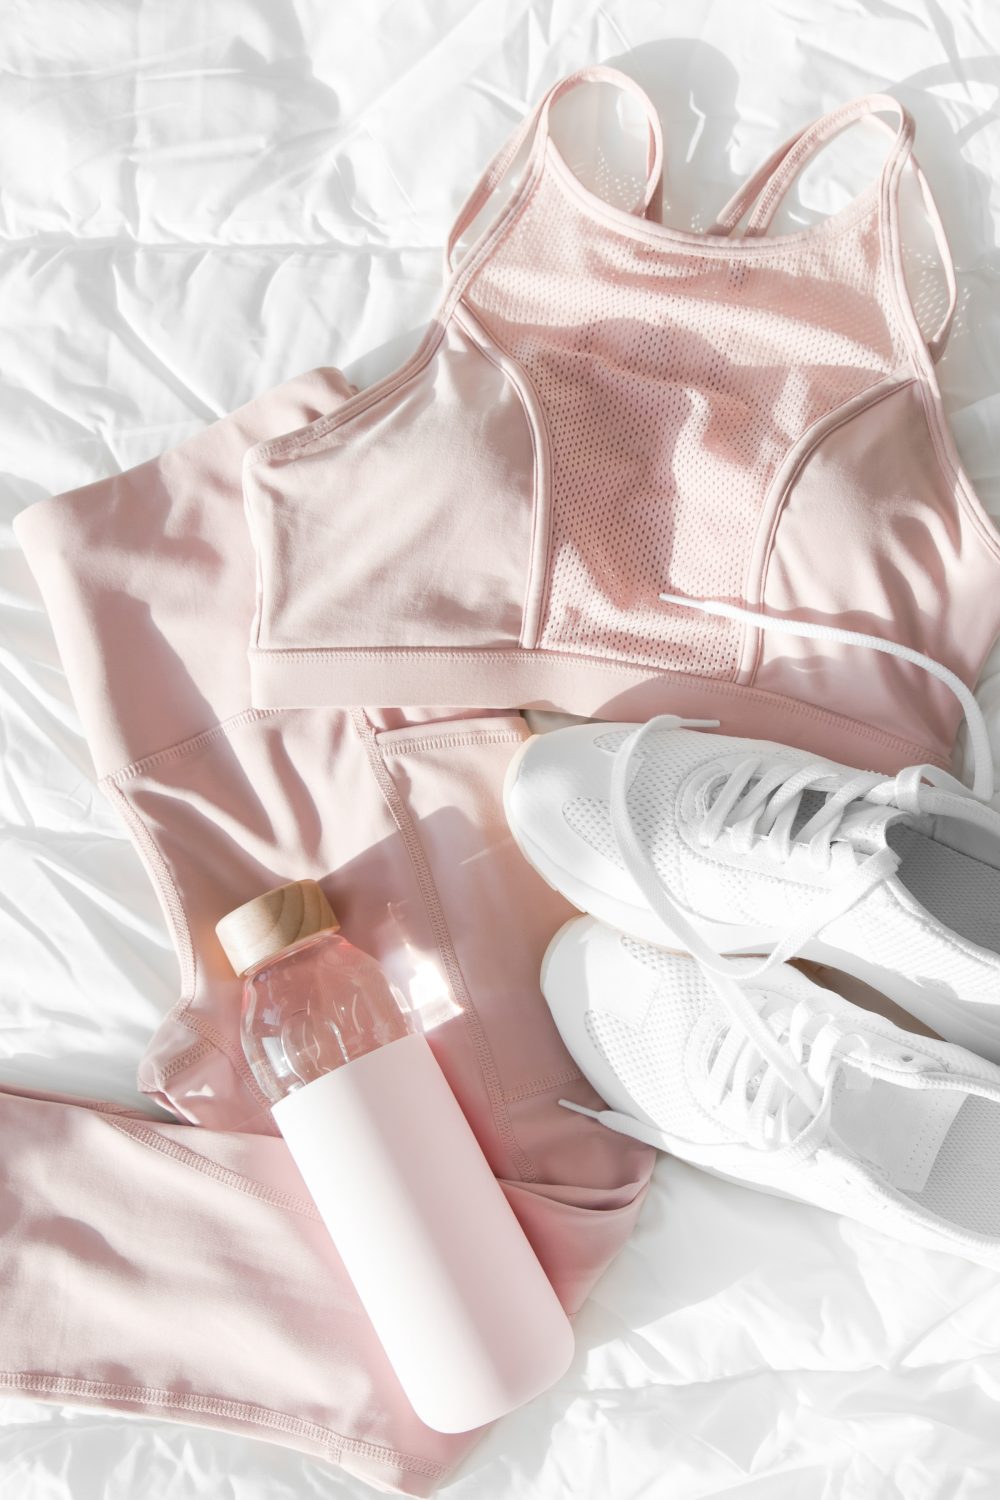 Blush pink activewear and drink bottle